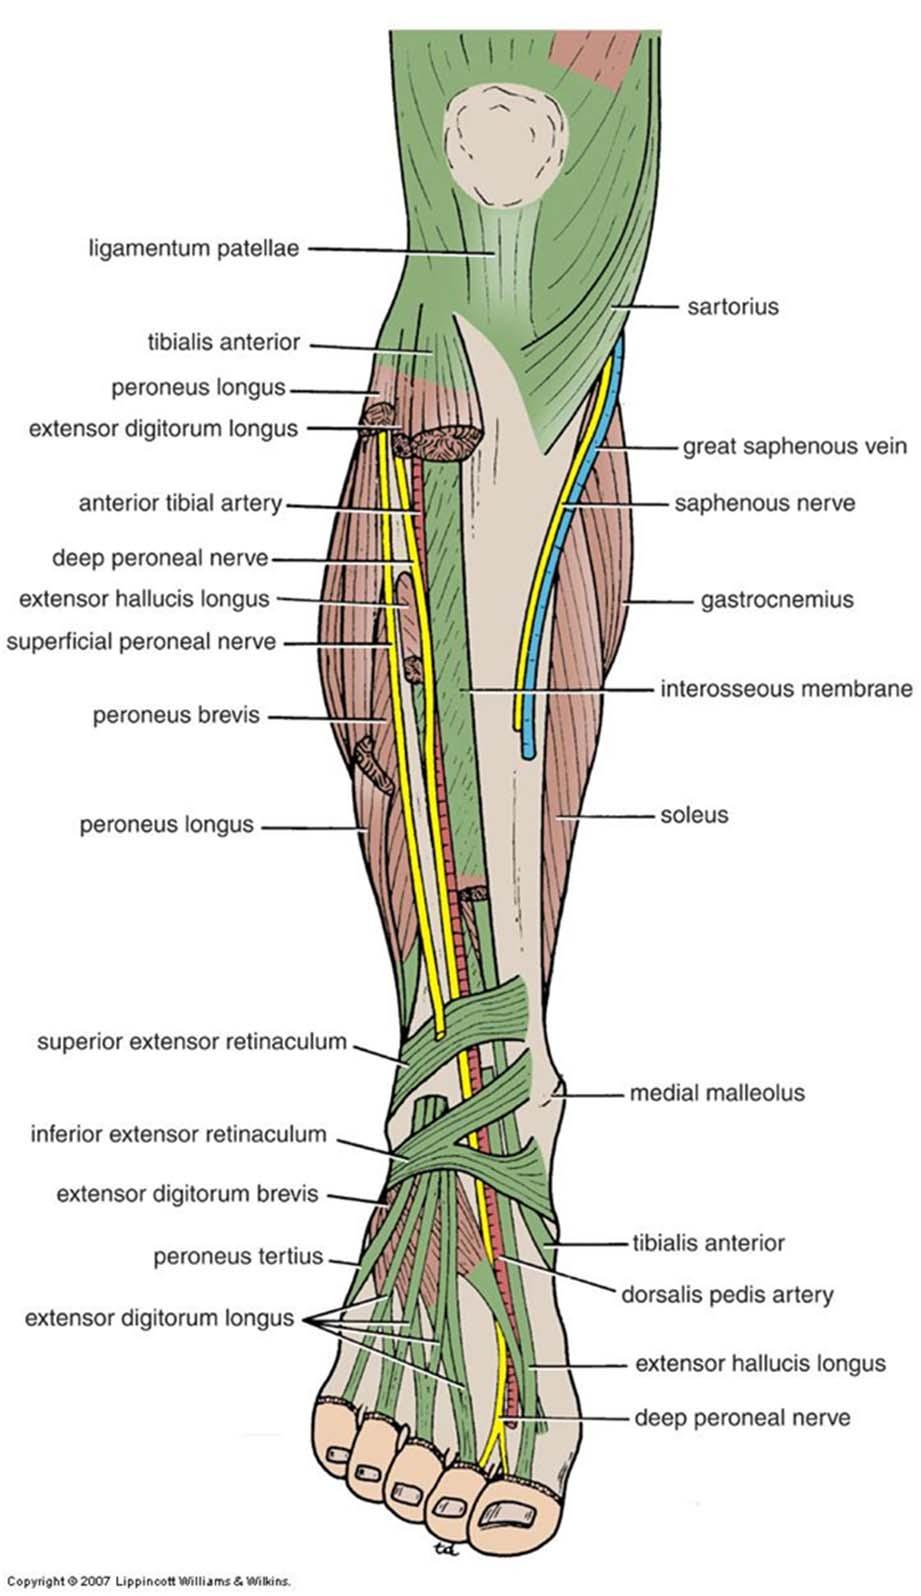 Deep Peroneal Nerve: Relations Descends in the anterior compartment deep to the extensor